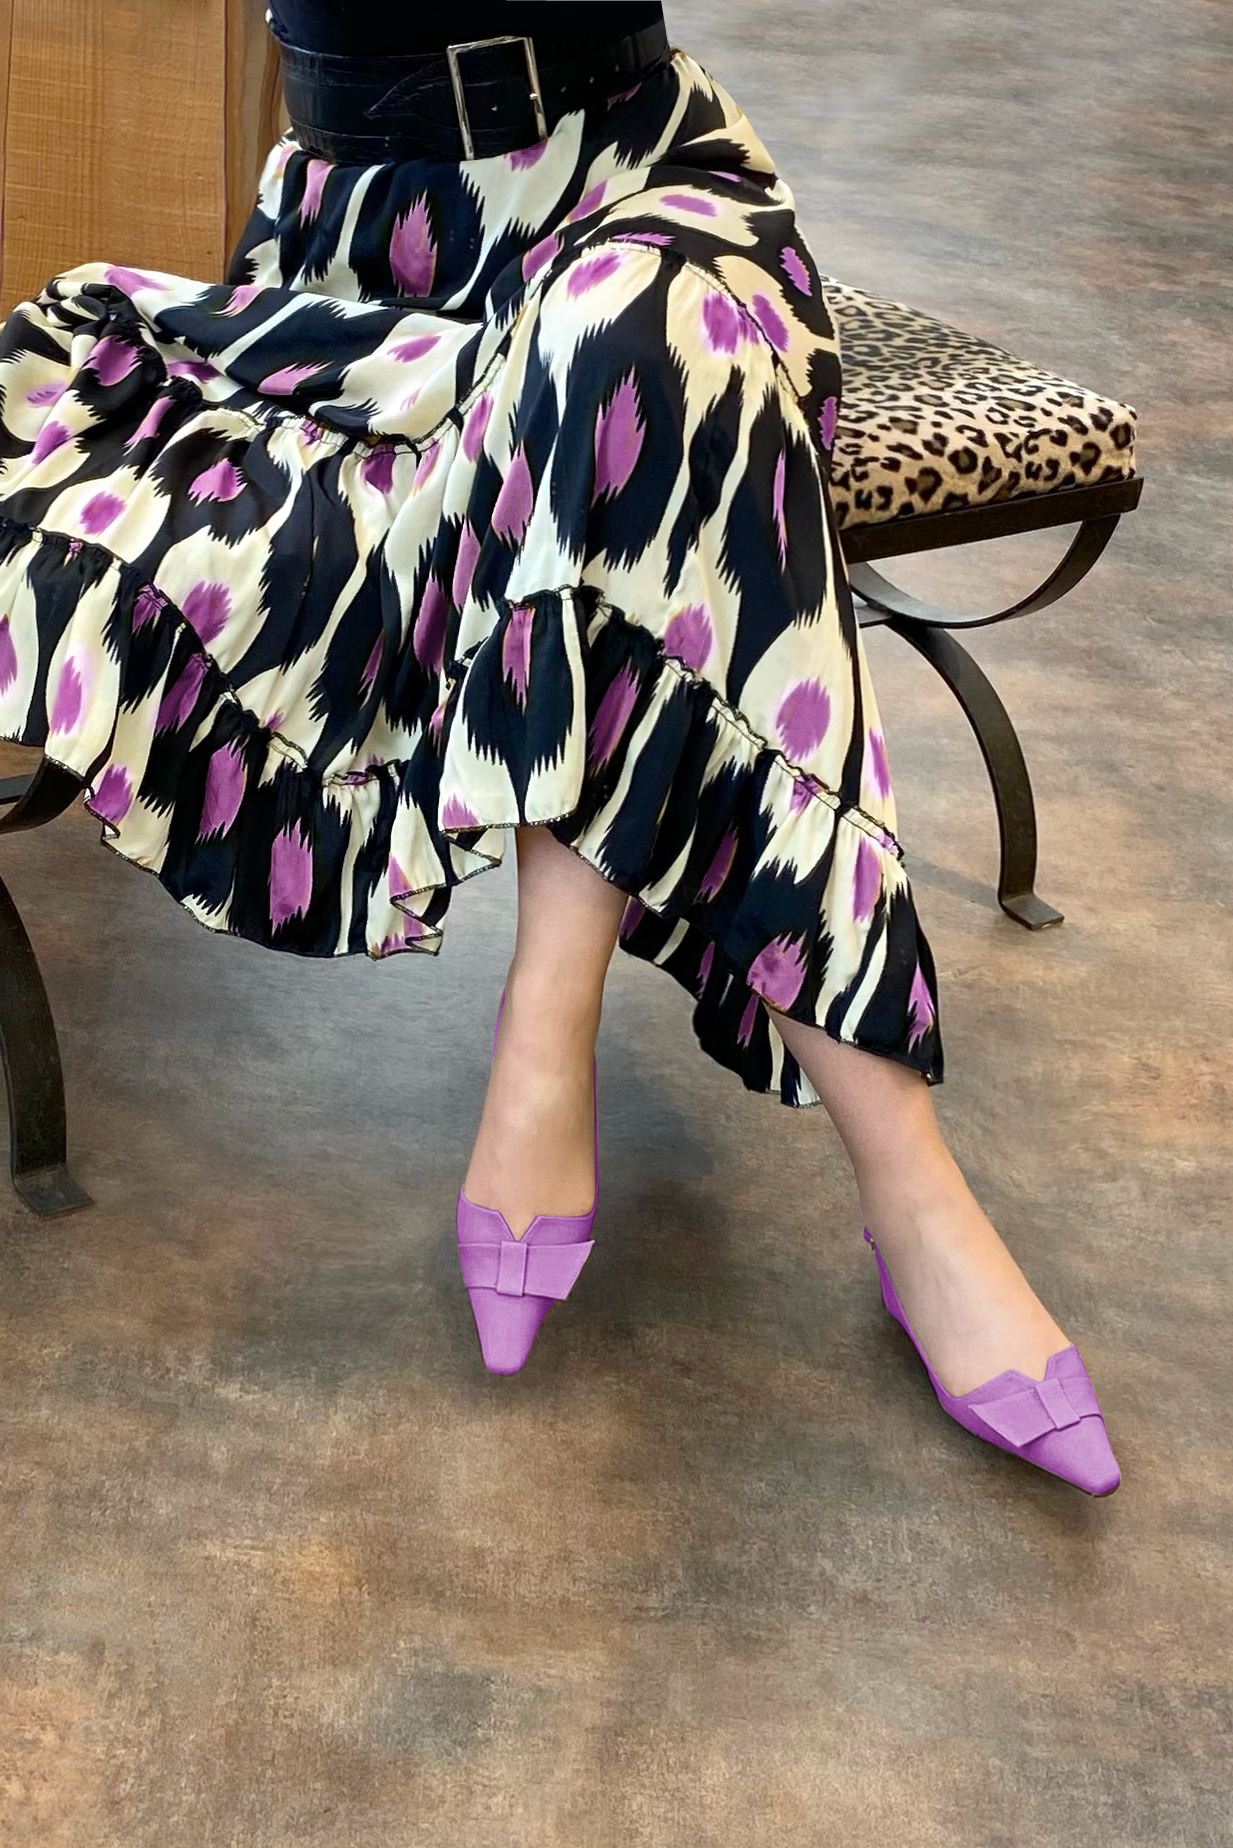 Mauve purple women's open back shoes, with a knot. Tapered toe. Low block heels. Worn view - Florence KOOIJMAN